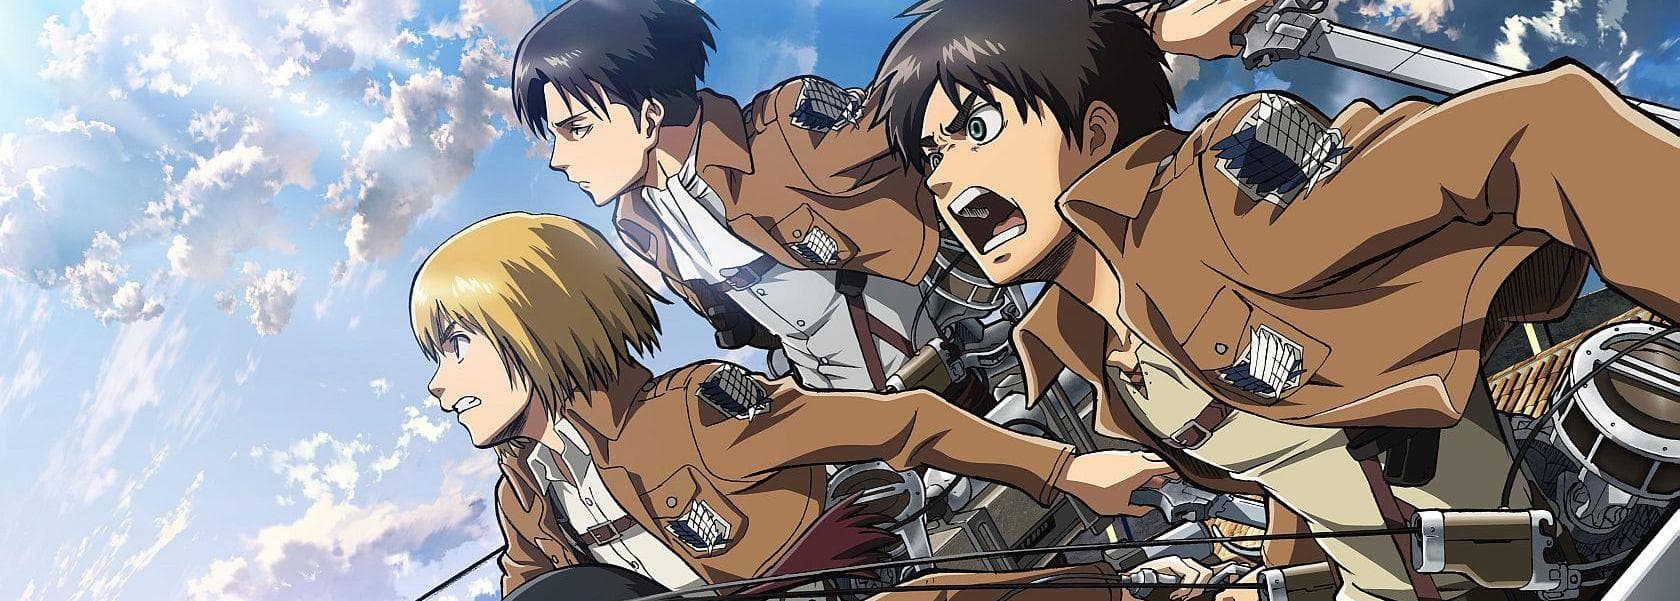 14 Reasons Attack On Titan Is Wildly Overrated